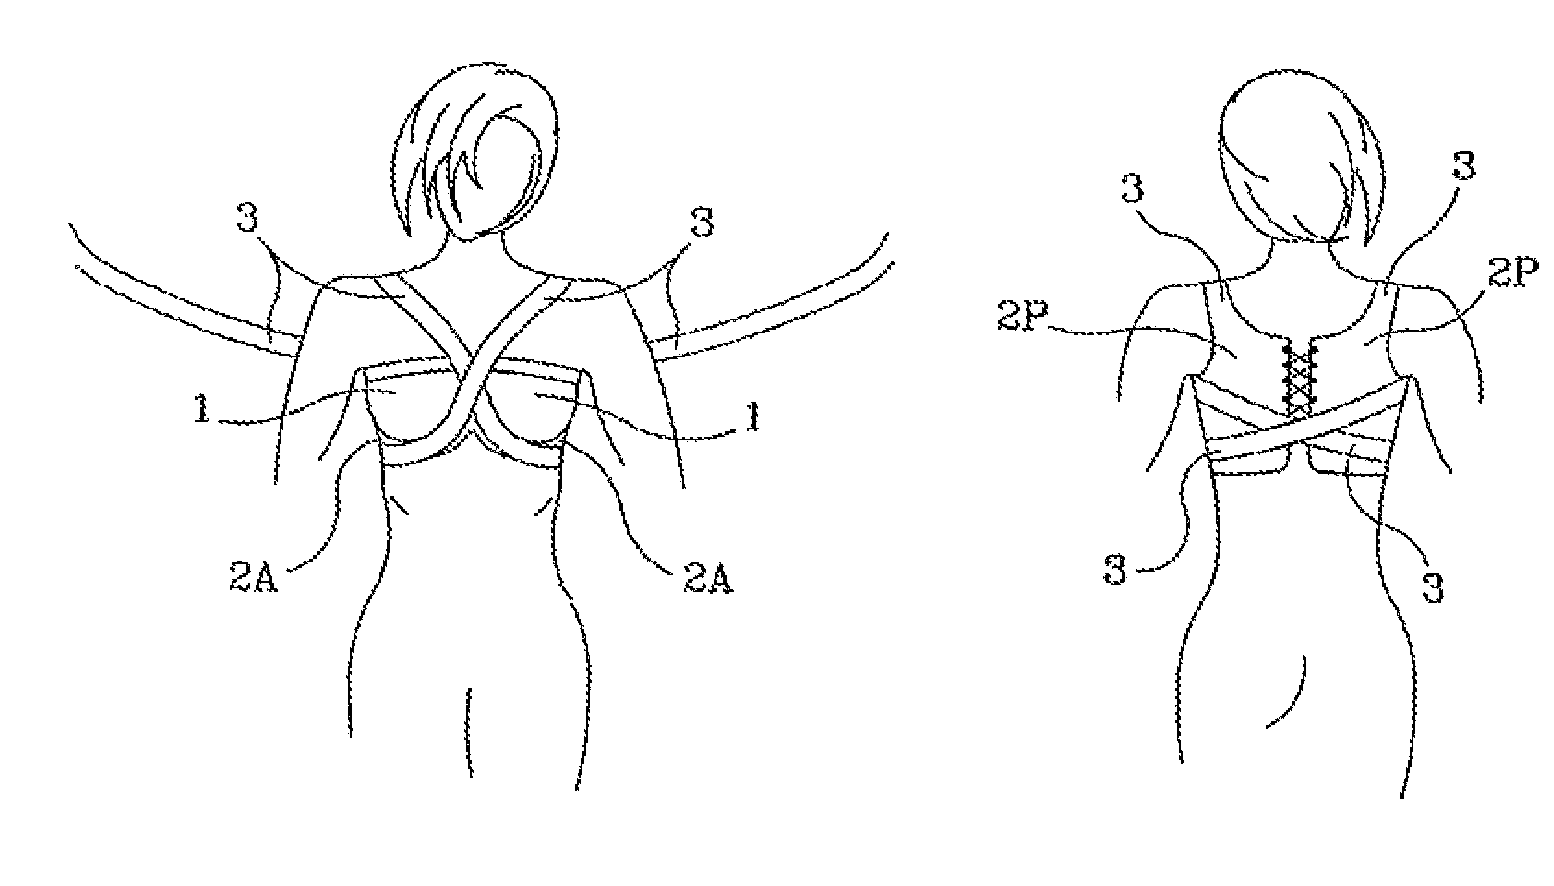 Post-surgical medical device for quadrectomy, mastectomy and/or mammary surgery